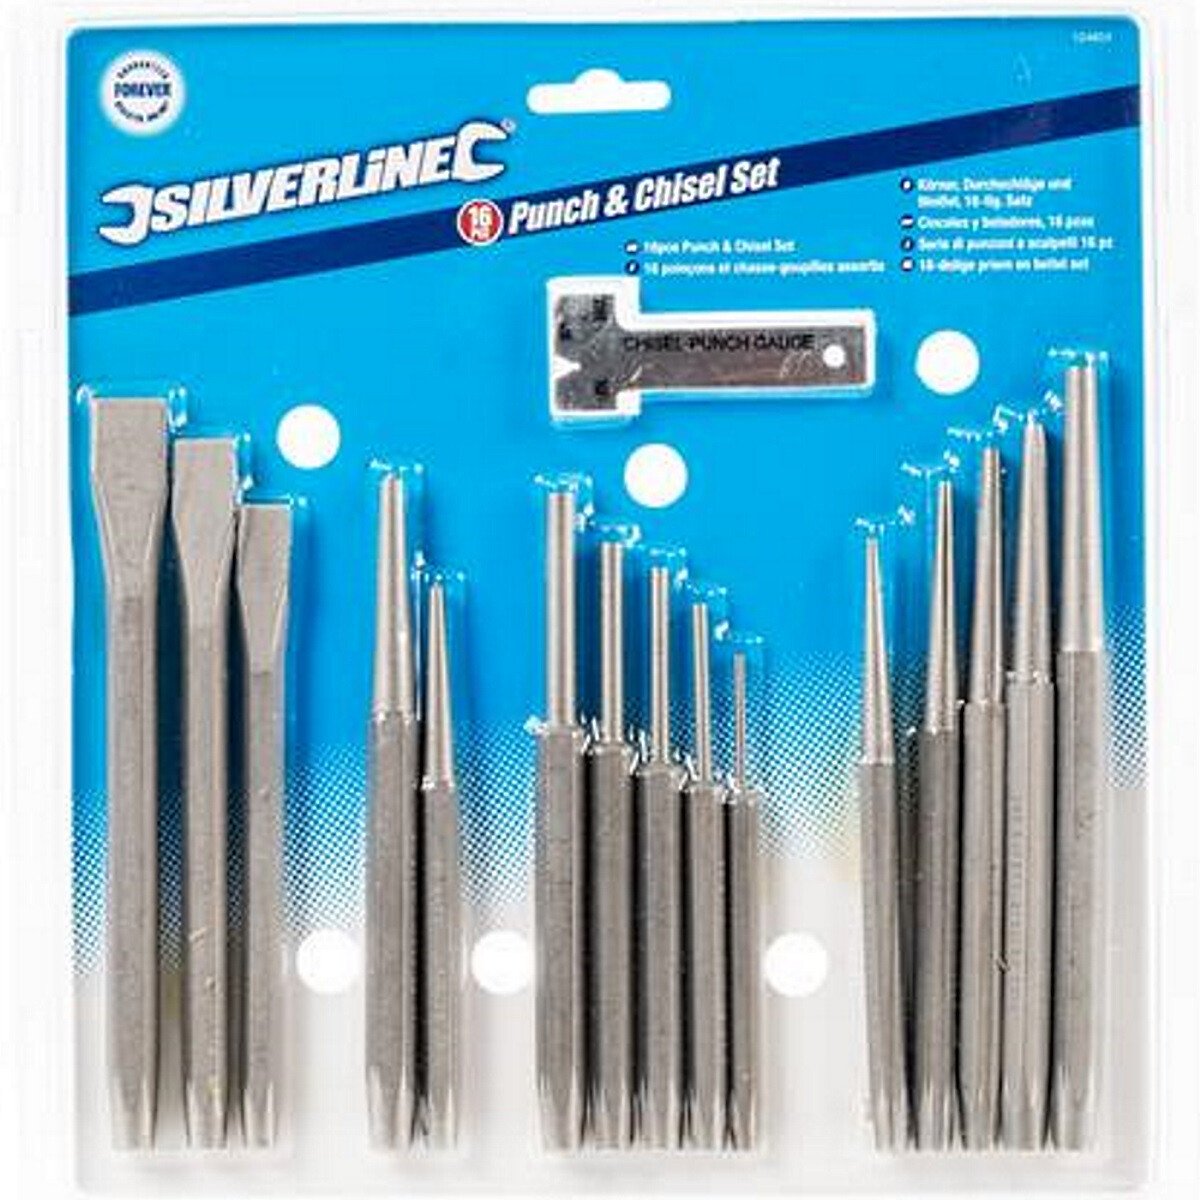 Silverline 124853 Punch and Chisel Set 16 Piece